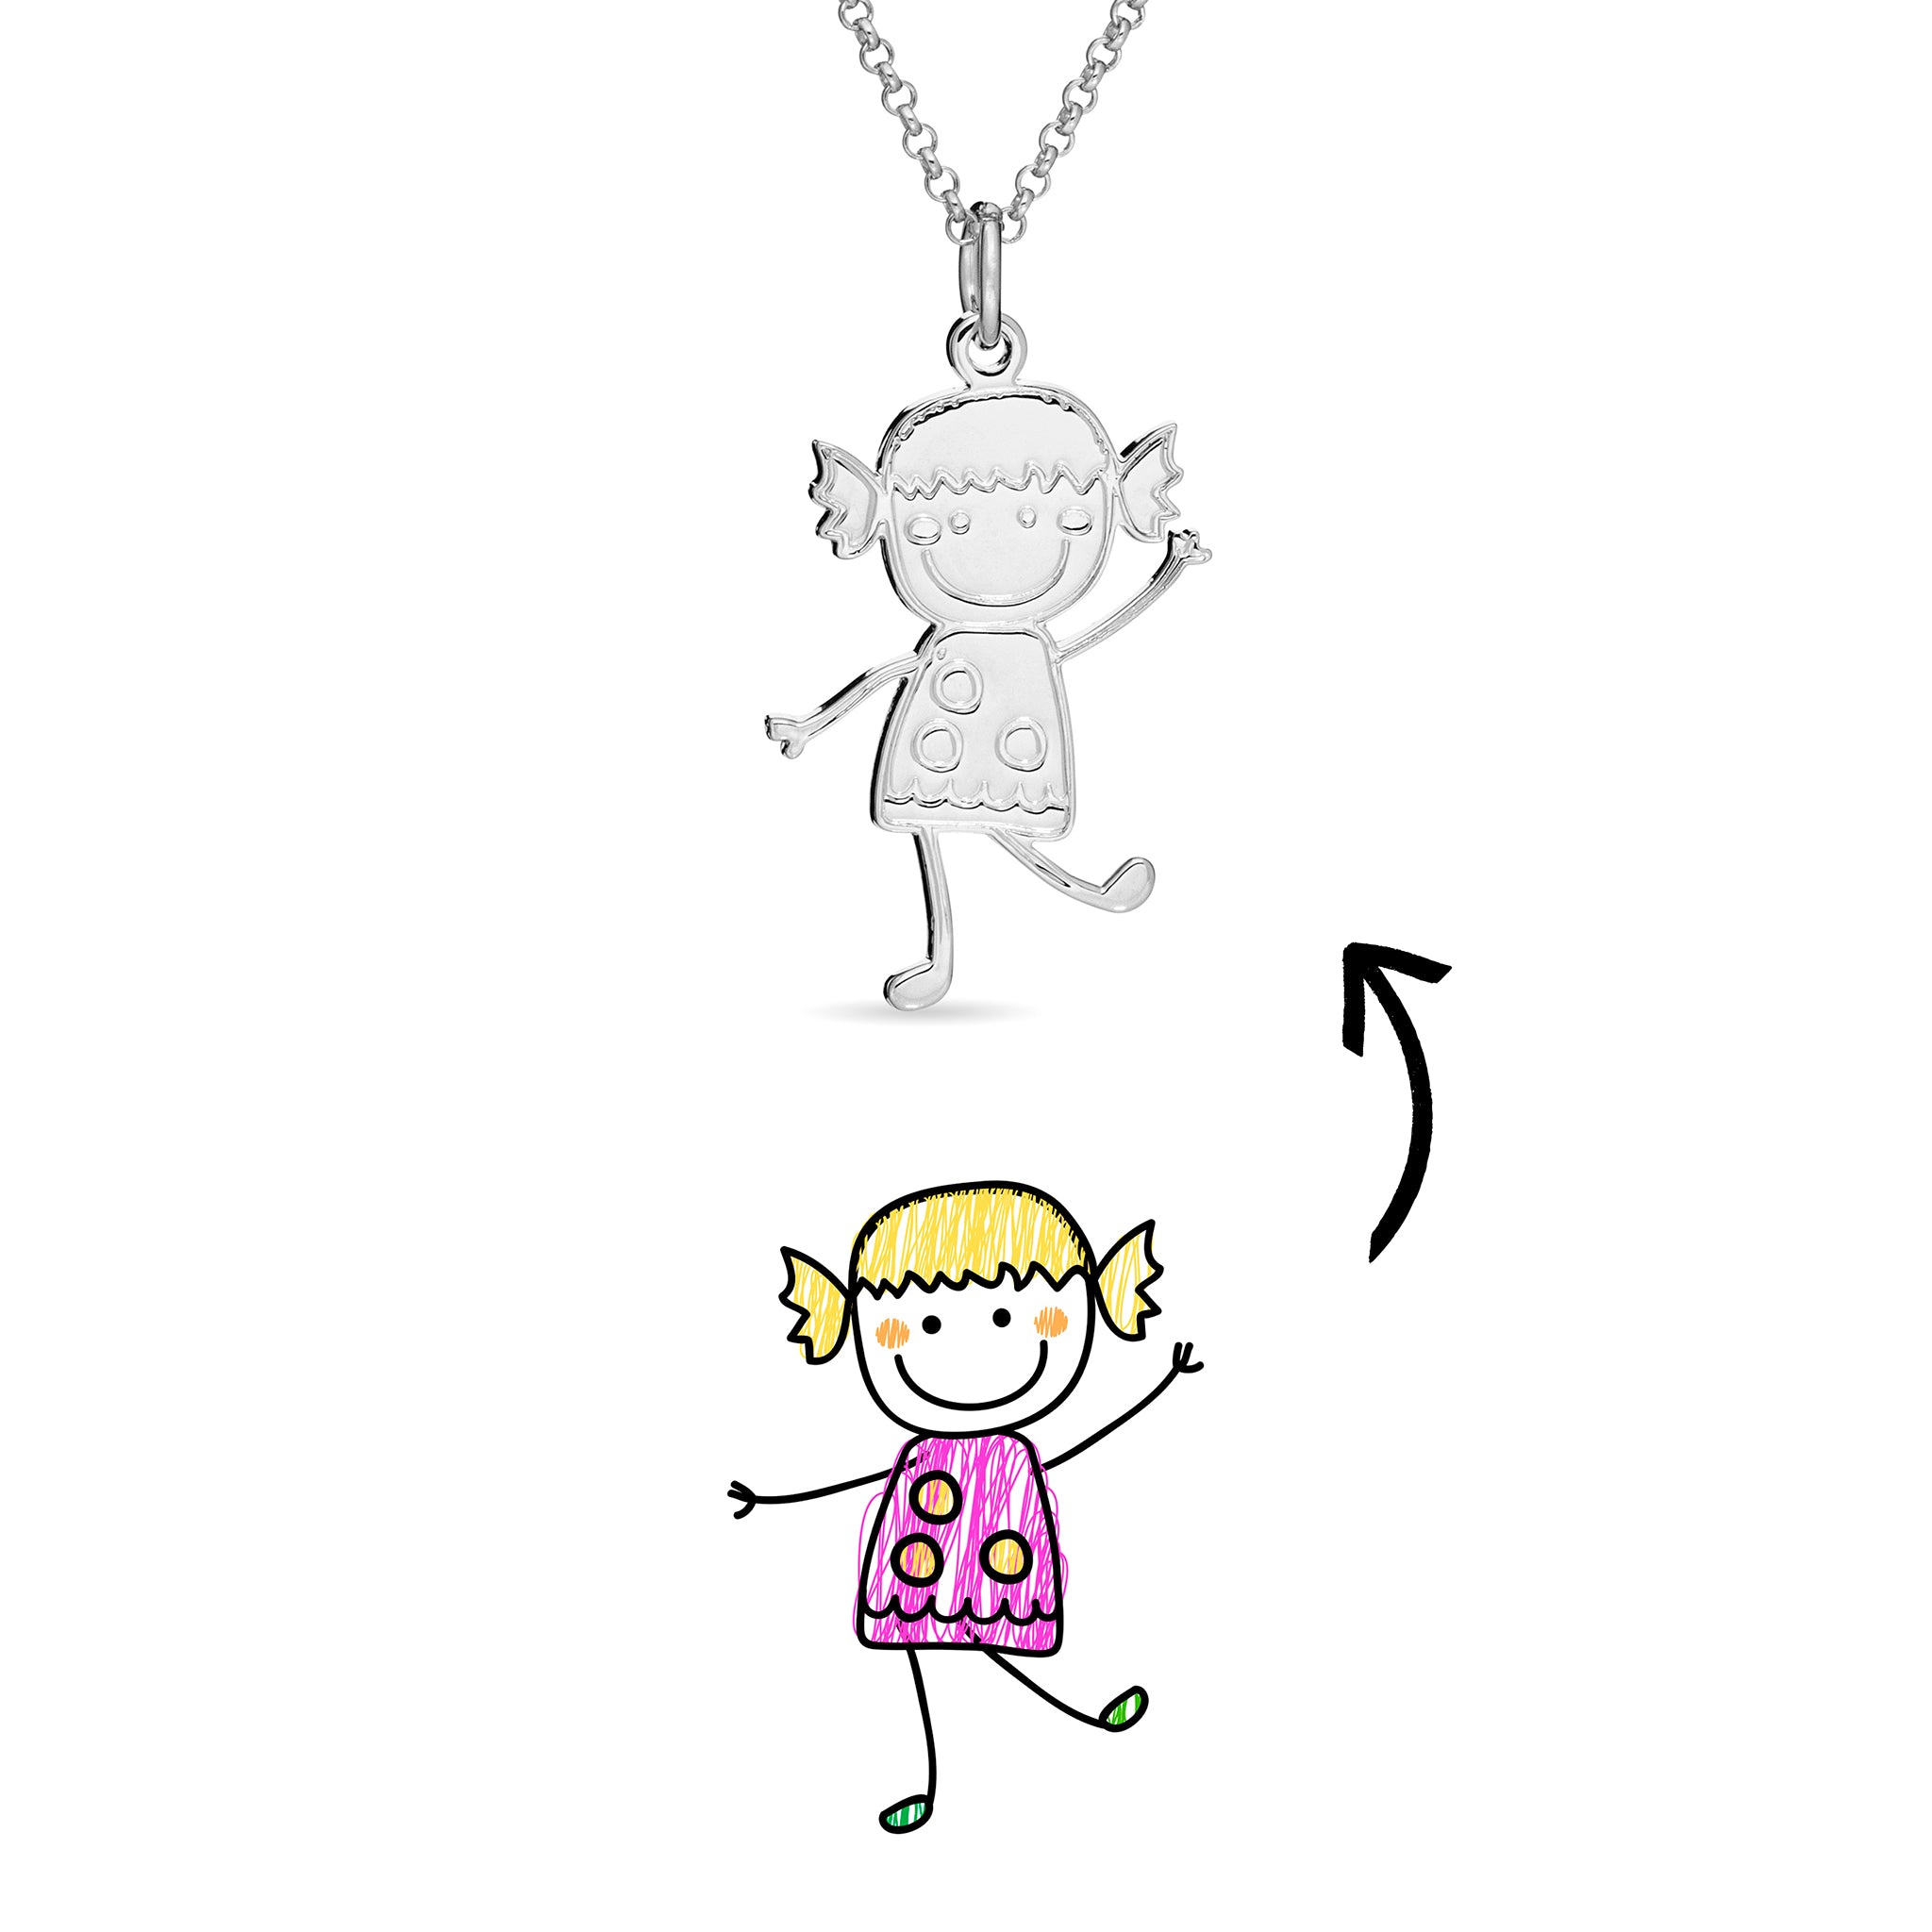 My Custom Drawing Necklace